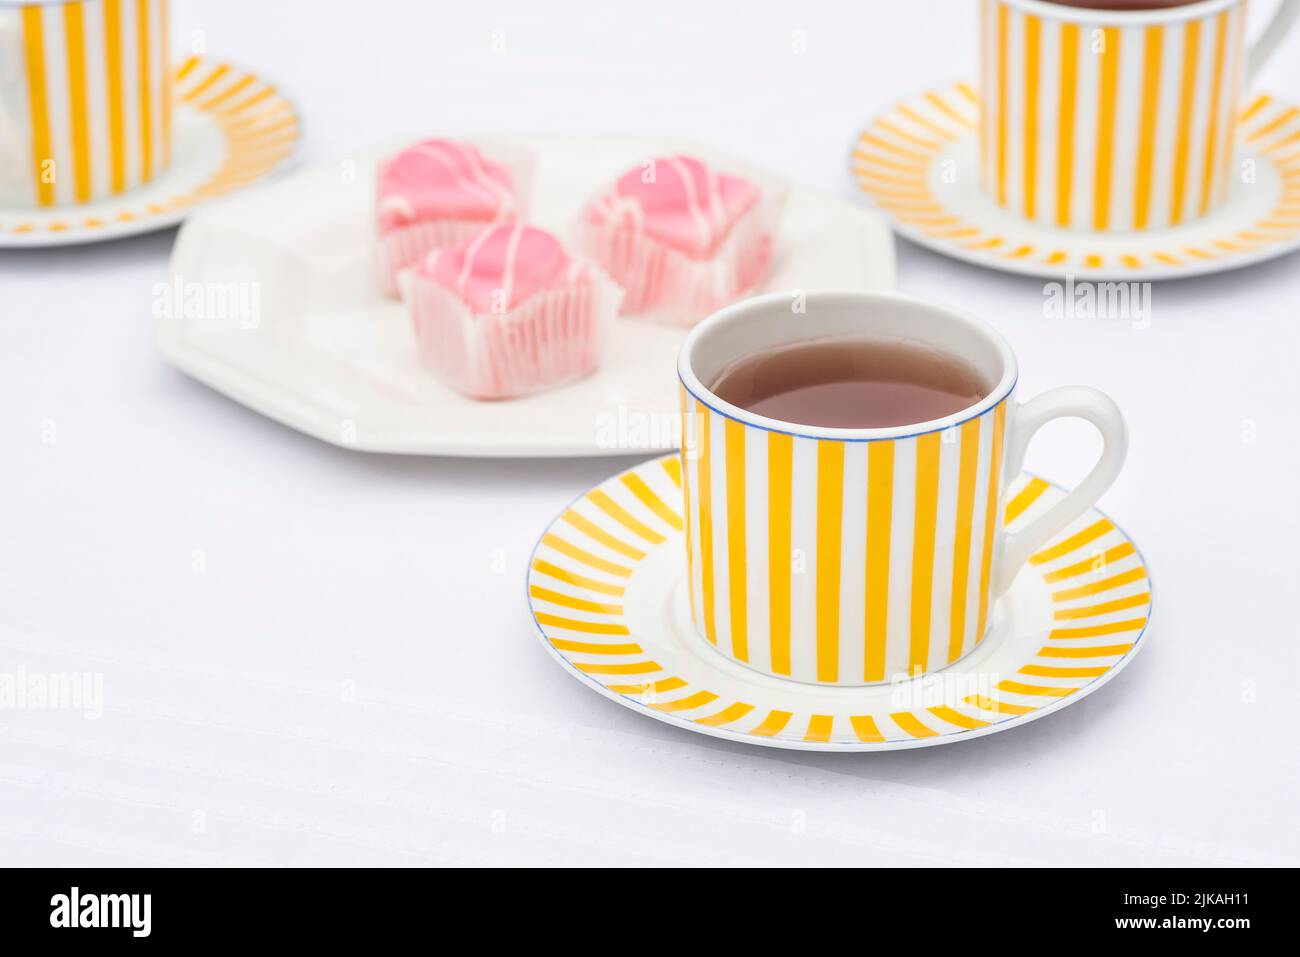 Food / teatime treat: Close up of pink fondant icing covered sponge cakes and black tea. Stock Photo